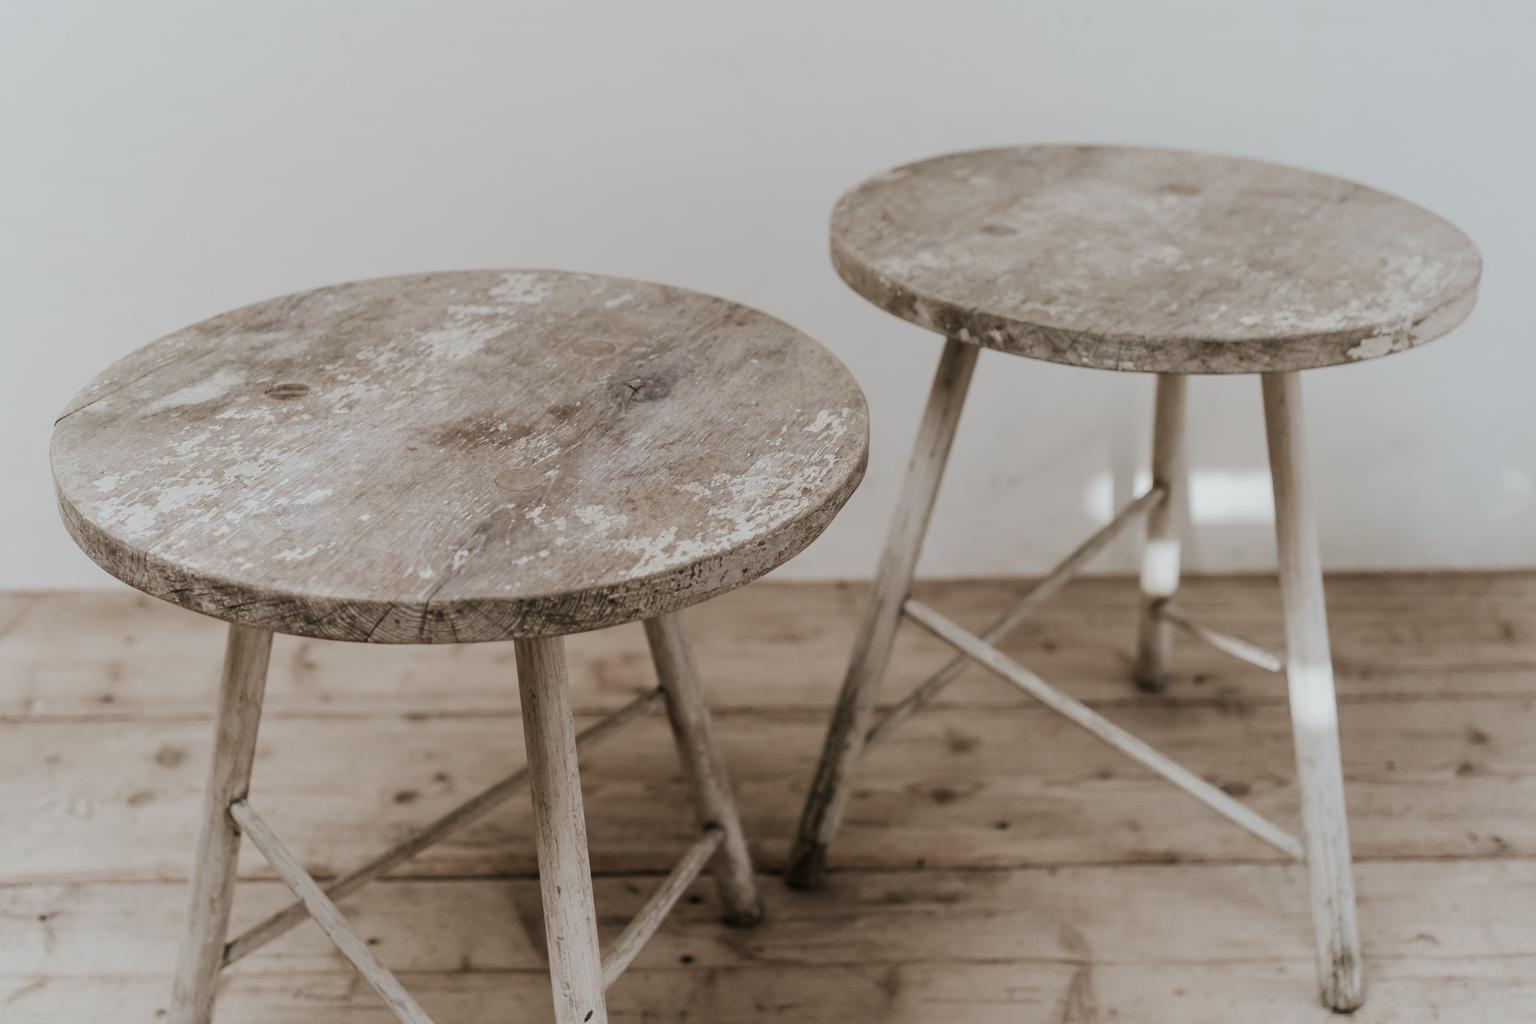 Wonderful distressed patina on this pair of oak side tables ... great lines.
   